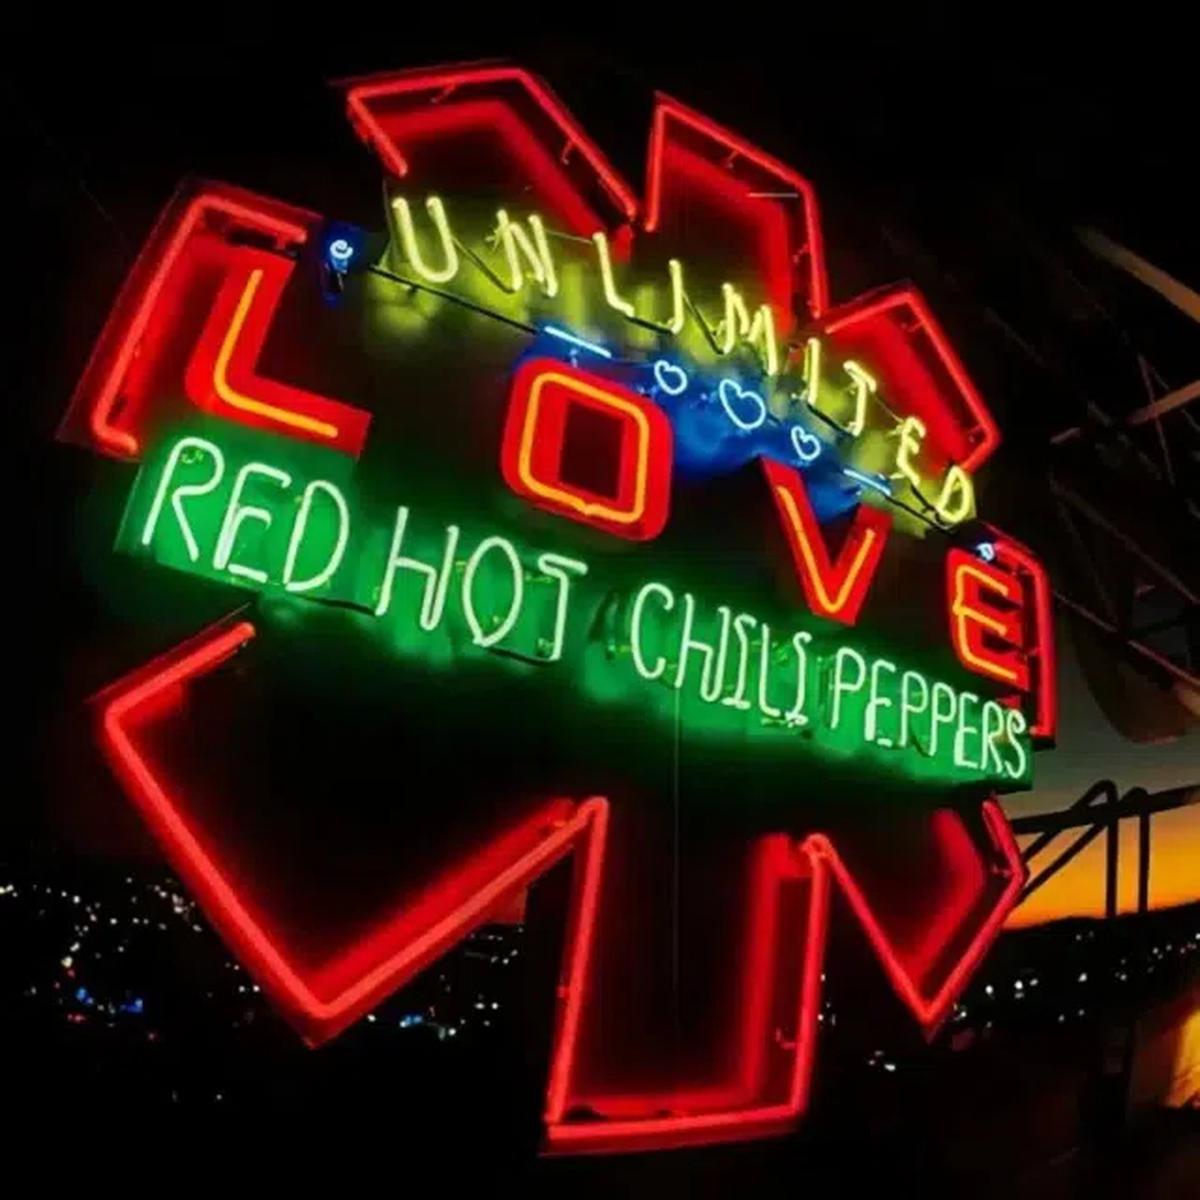 Red hot chili peppers - unlimited love -